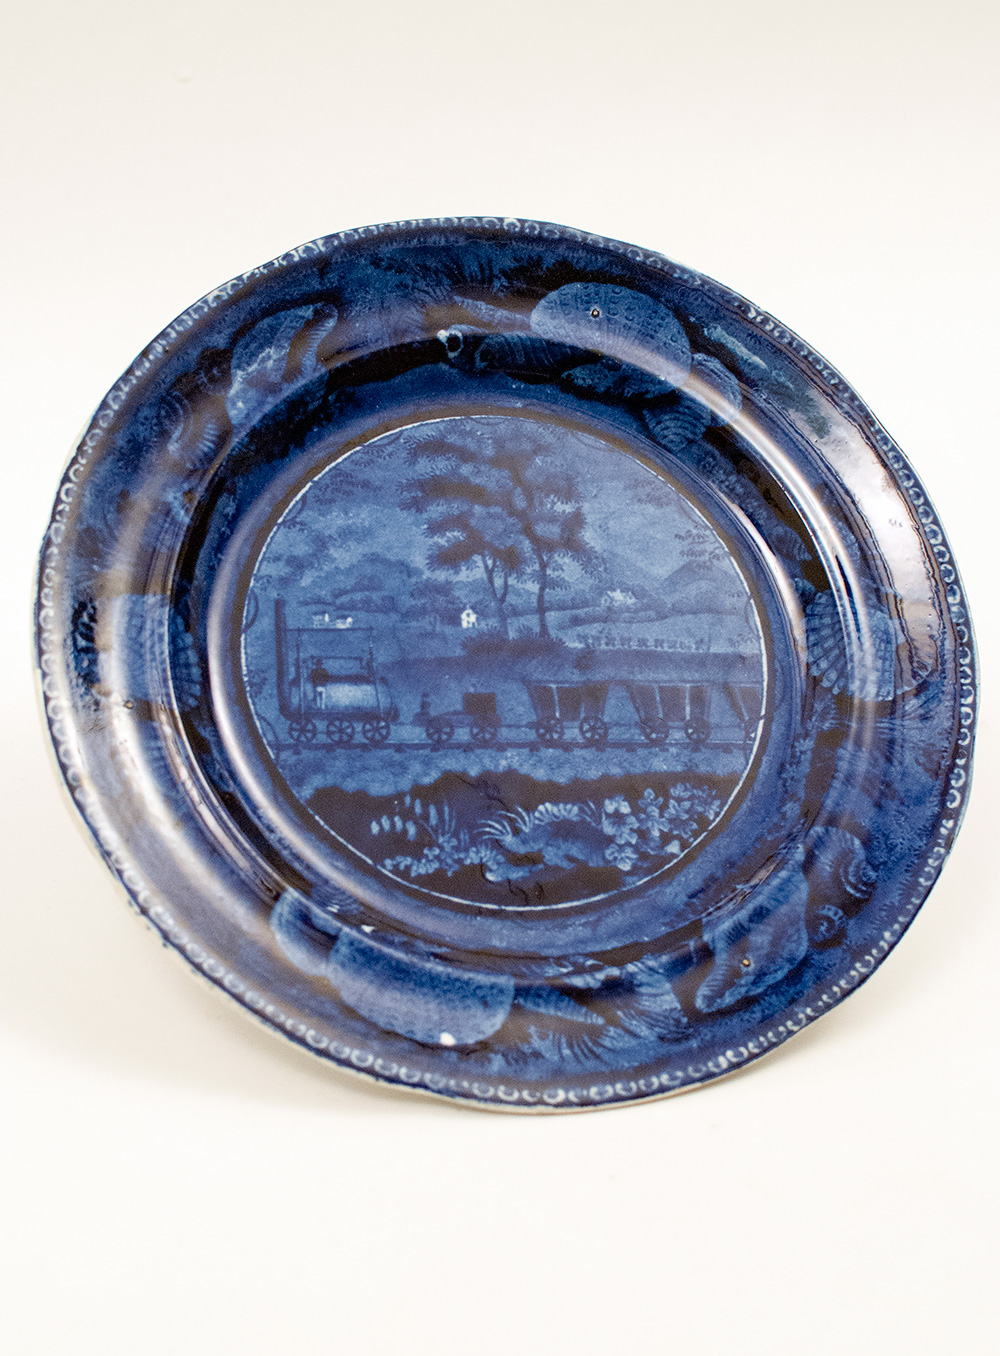 Historical Staffordshire: 1820s American View Baltimore and Ohio Railroad Level Plate For Sale